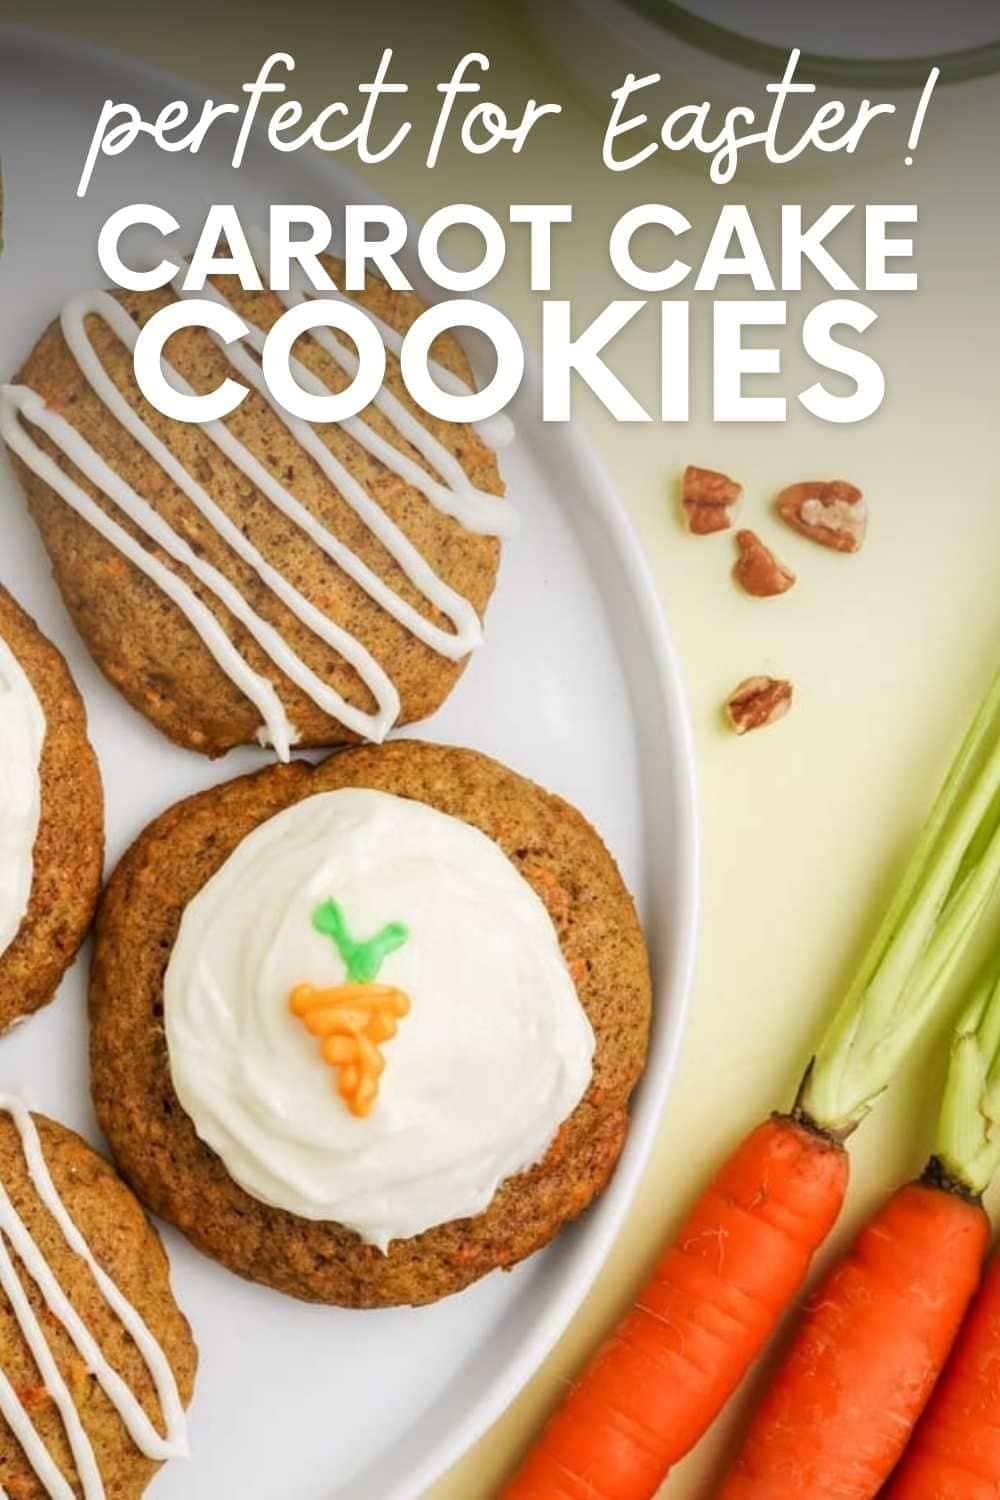 Cookies on a white plate next to some carrots. A text overlay reads "Perfect for Easter! Carrot Cake Cookies."